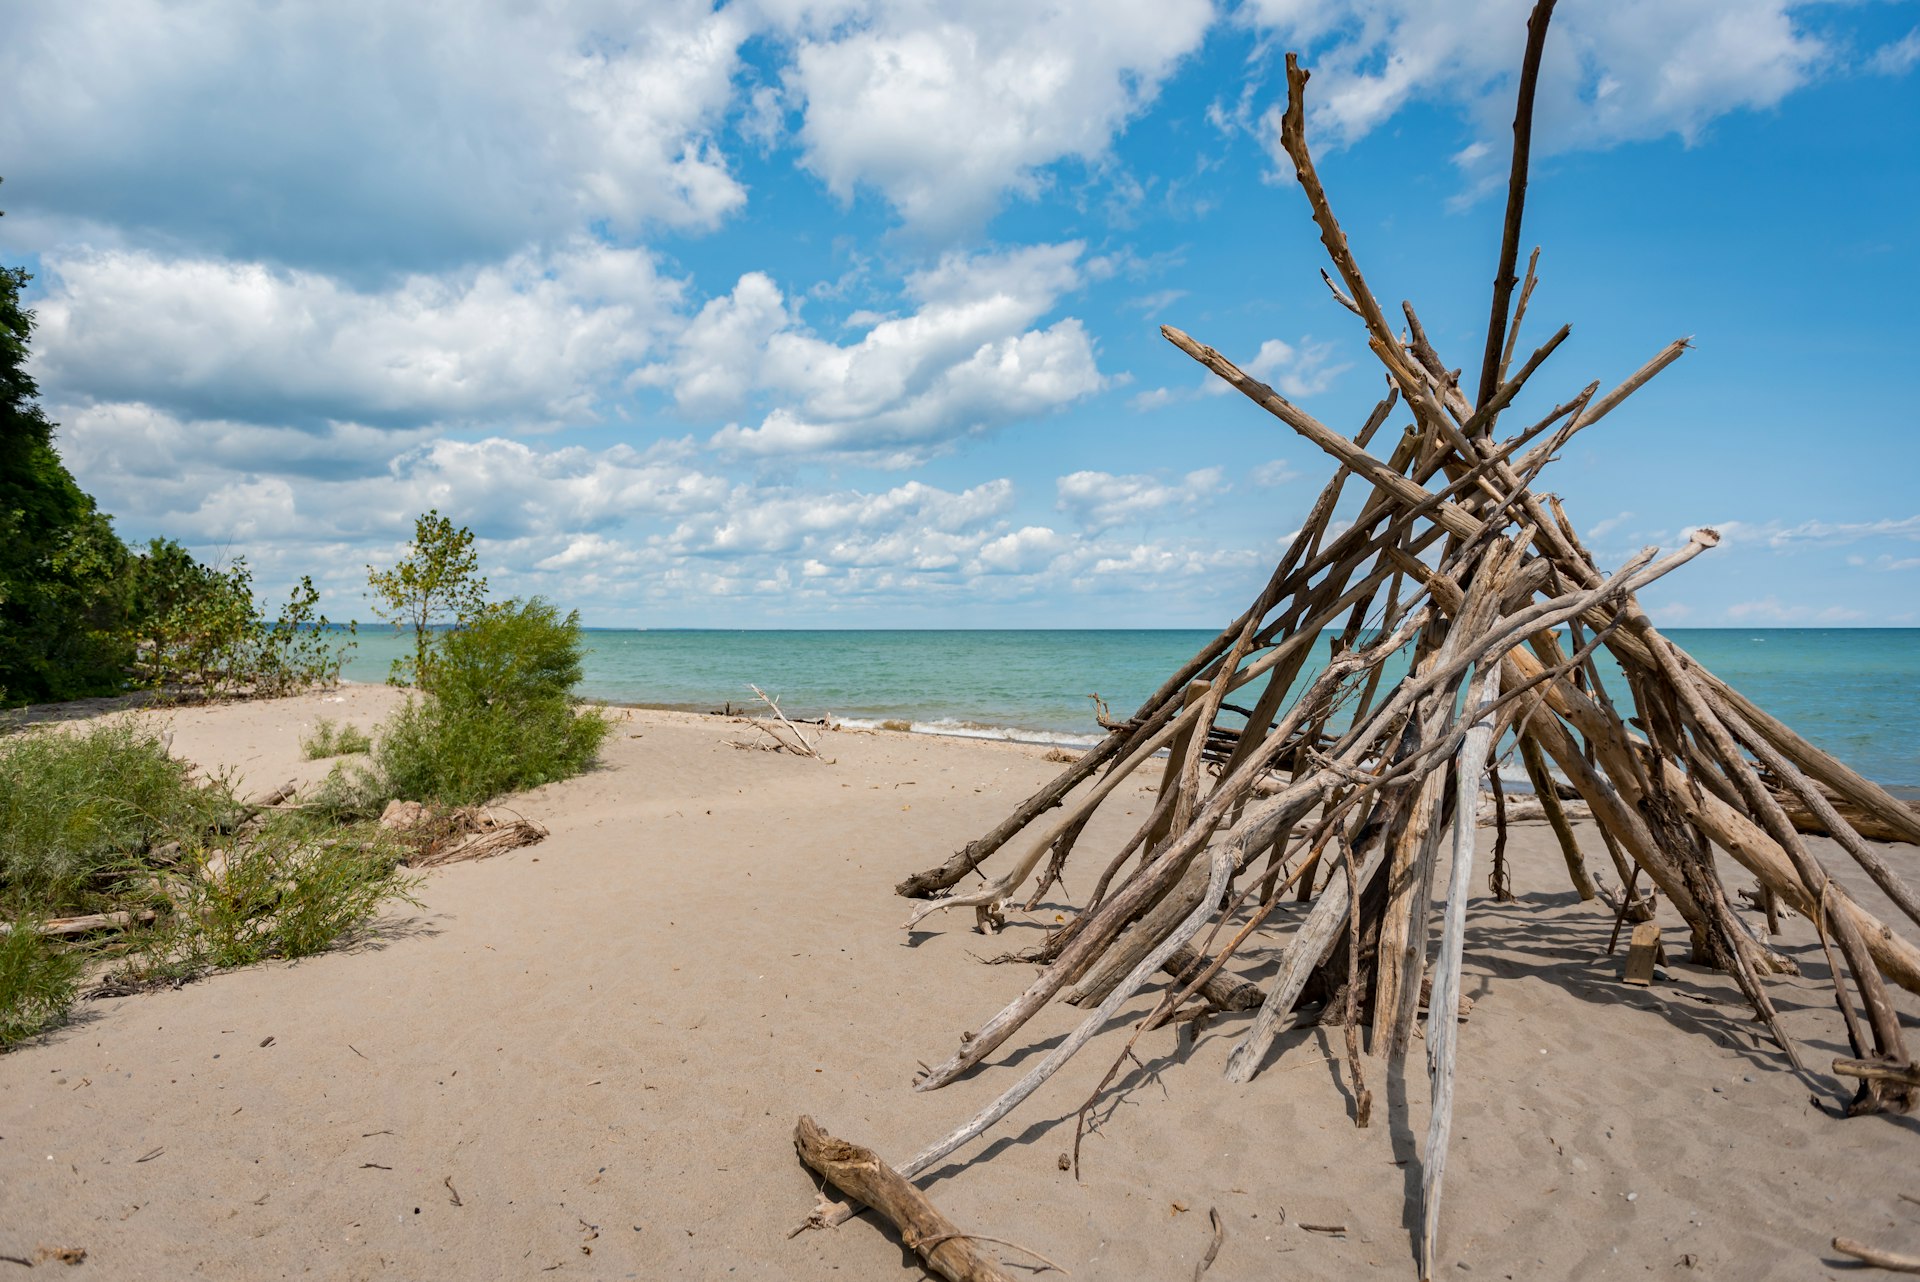 A series of large sticks piled together to form a teepee-like structure on an empty sandy beach